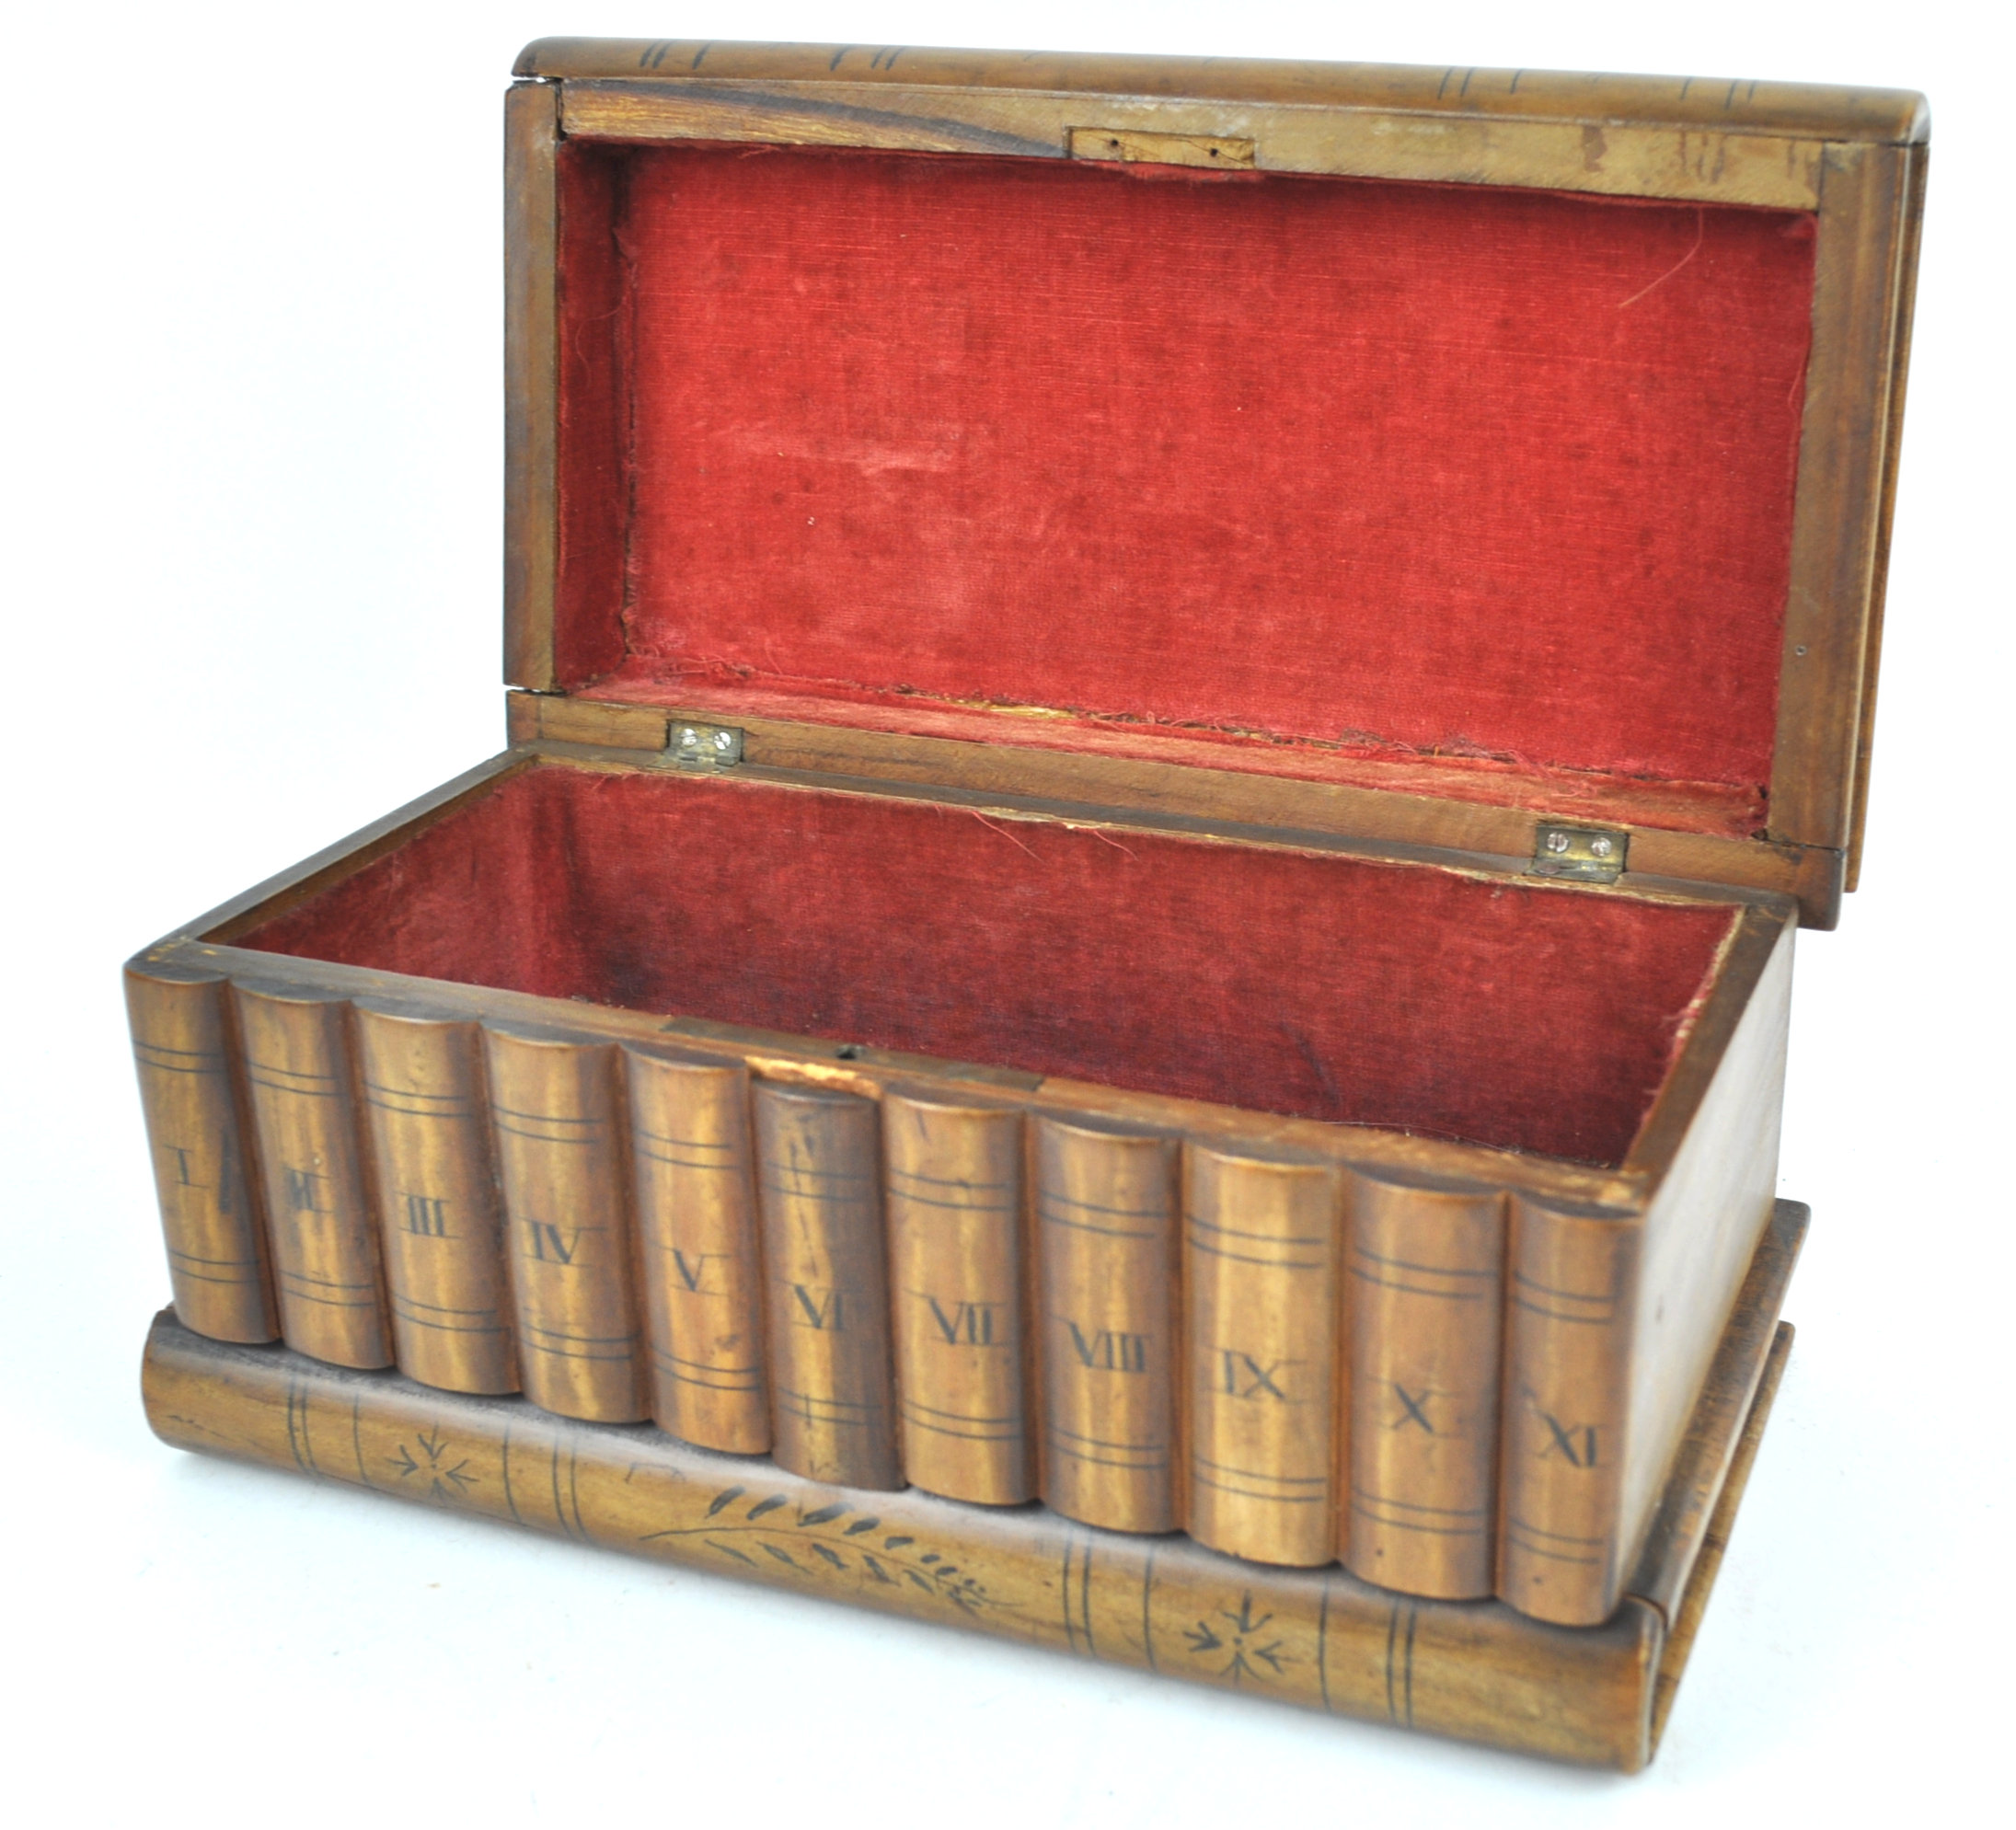 A 19th century Sorrento box in the form of a stack of books, - Image 3 of 3